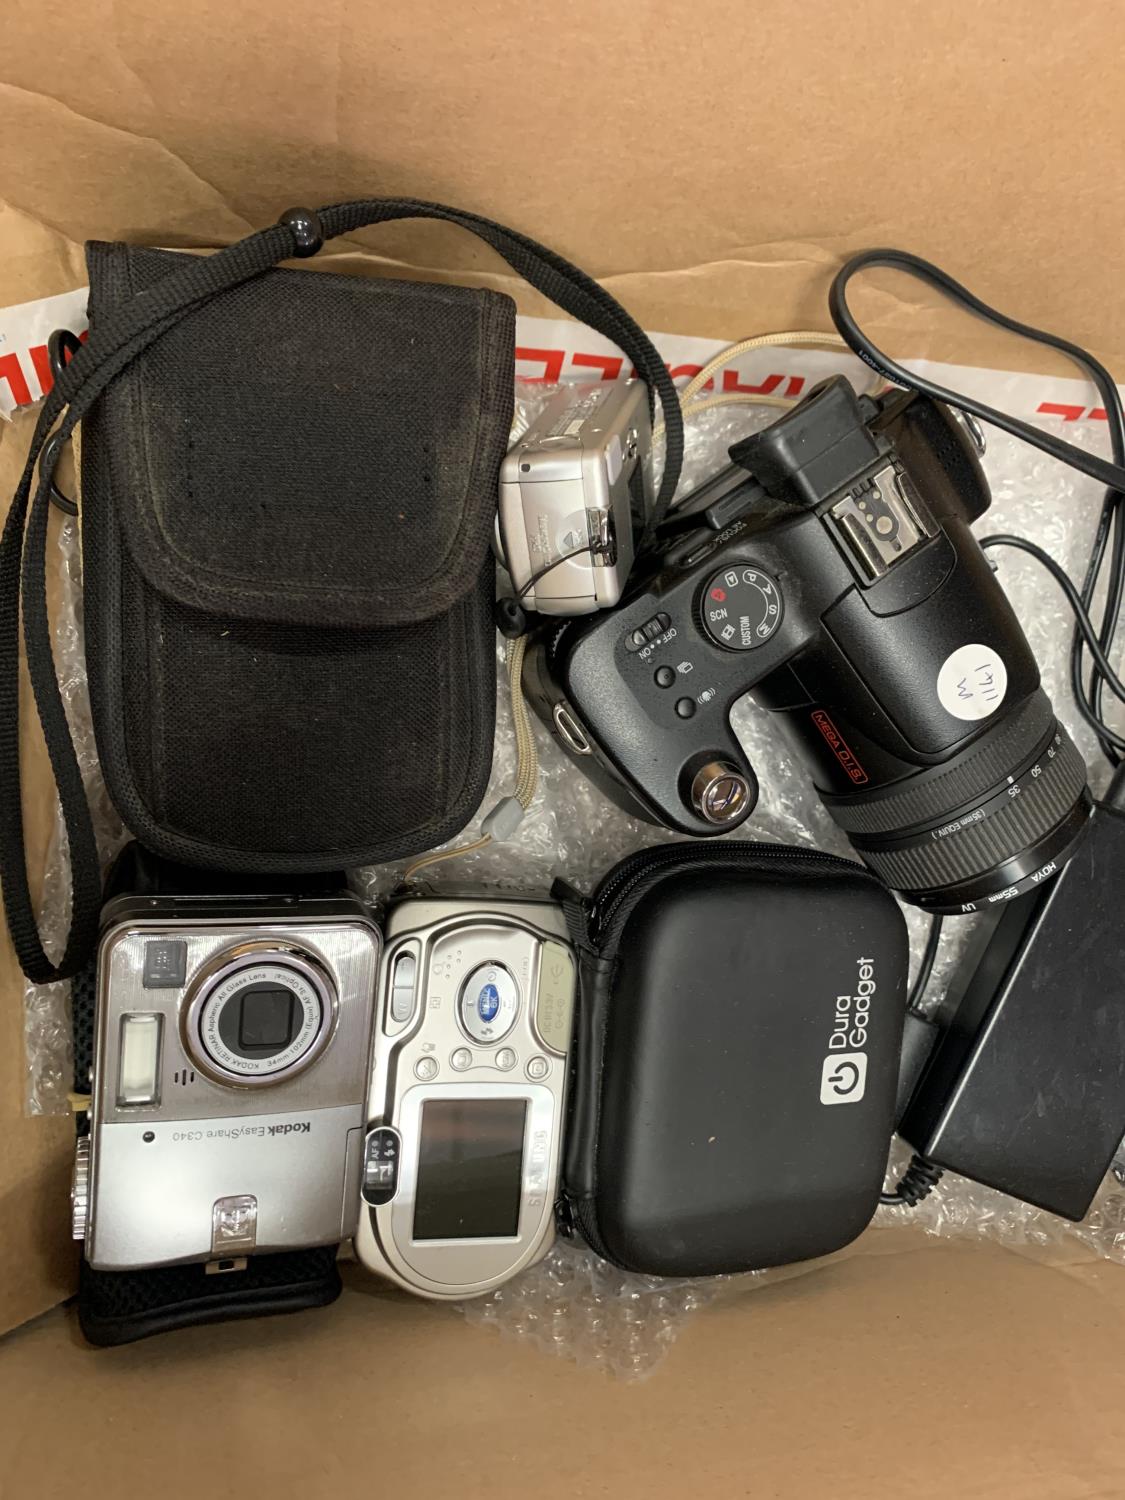 VARIOUS DIGITAL CAMERAS AND CASES TO INCLUDE KODAK, SAMSUNG ETC - Image 2 of 3